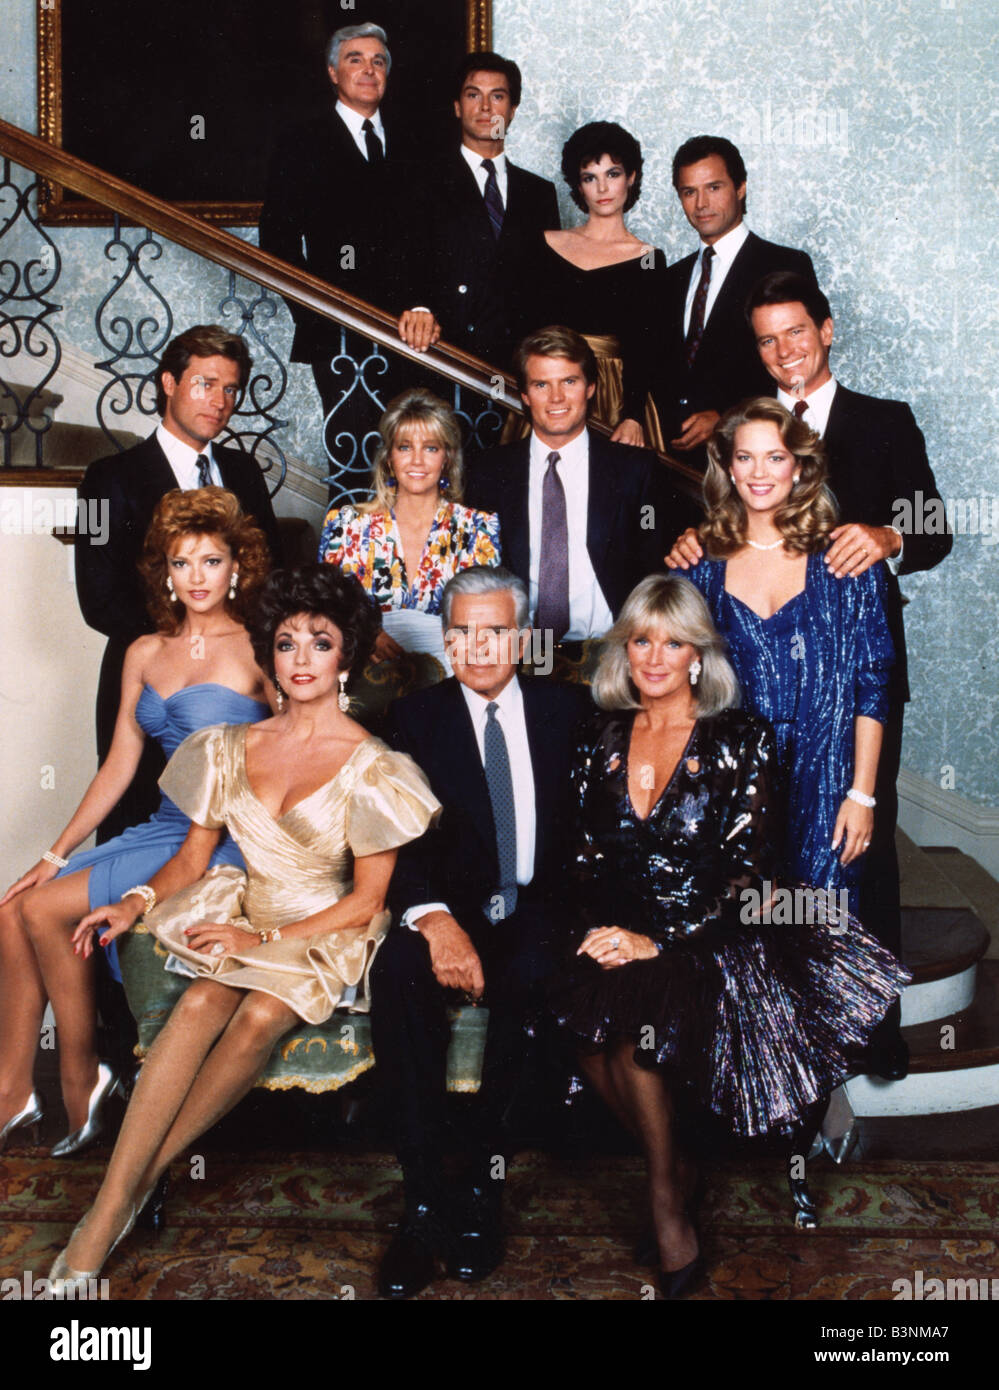 DYNASTY cast of the US TV soap opera about 1986 with seated Stephanie Beacham, Joan Collins, John Forsythe and Linda Evans Stock Photo